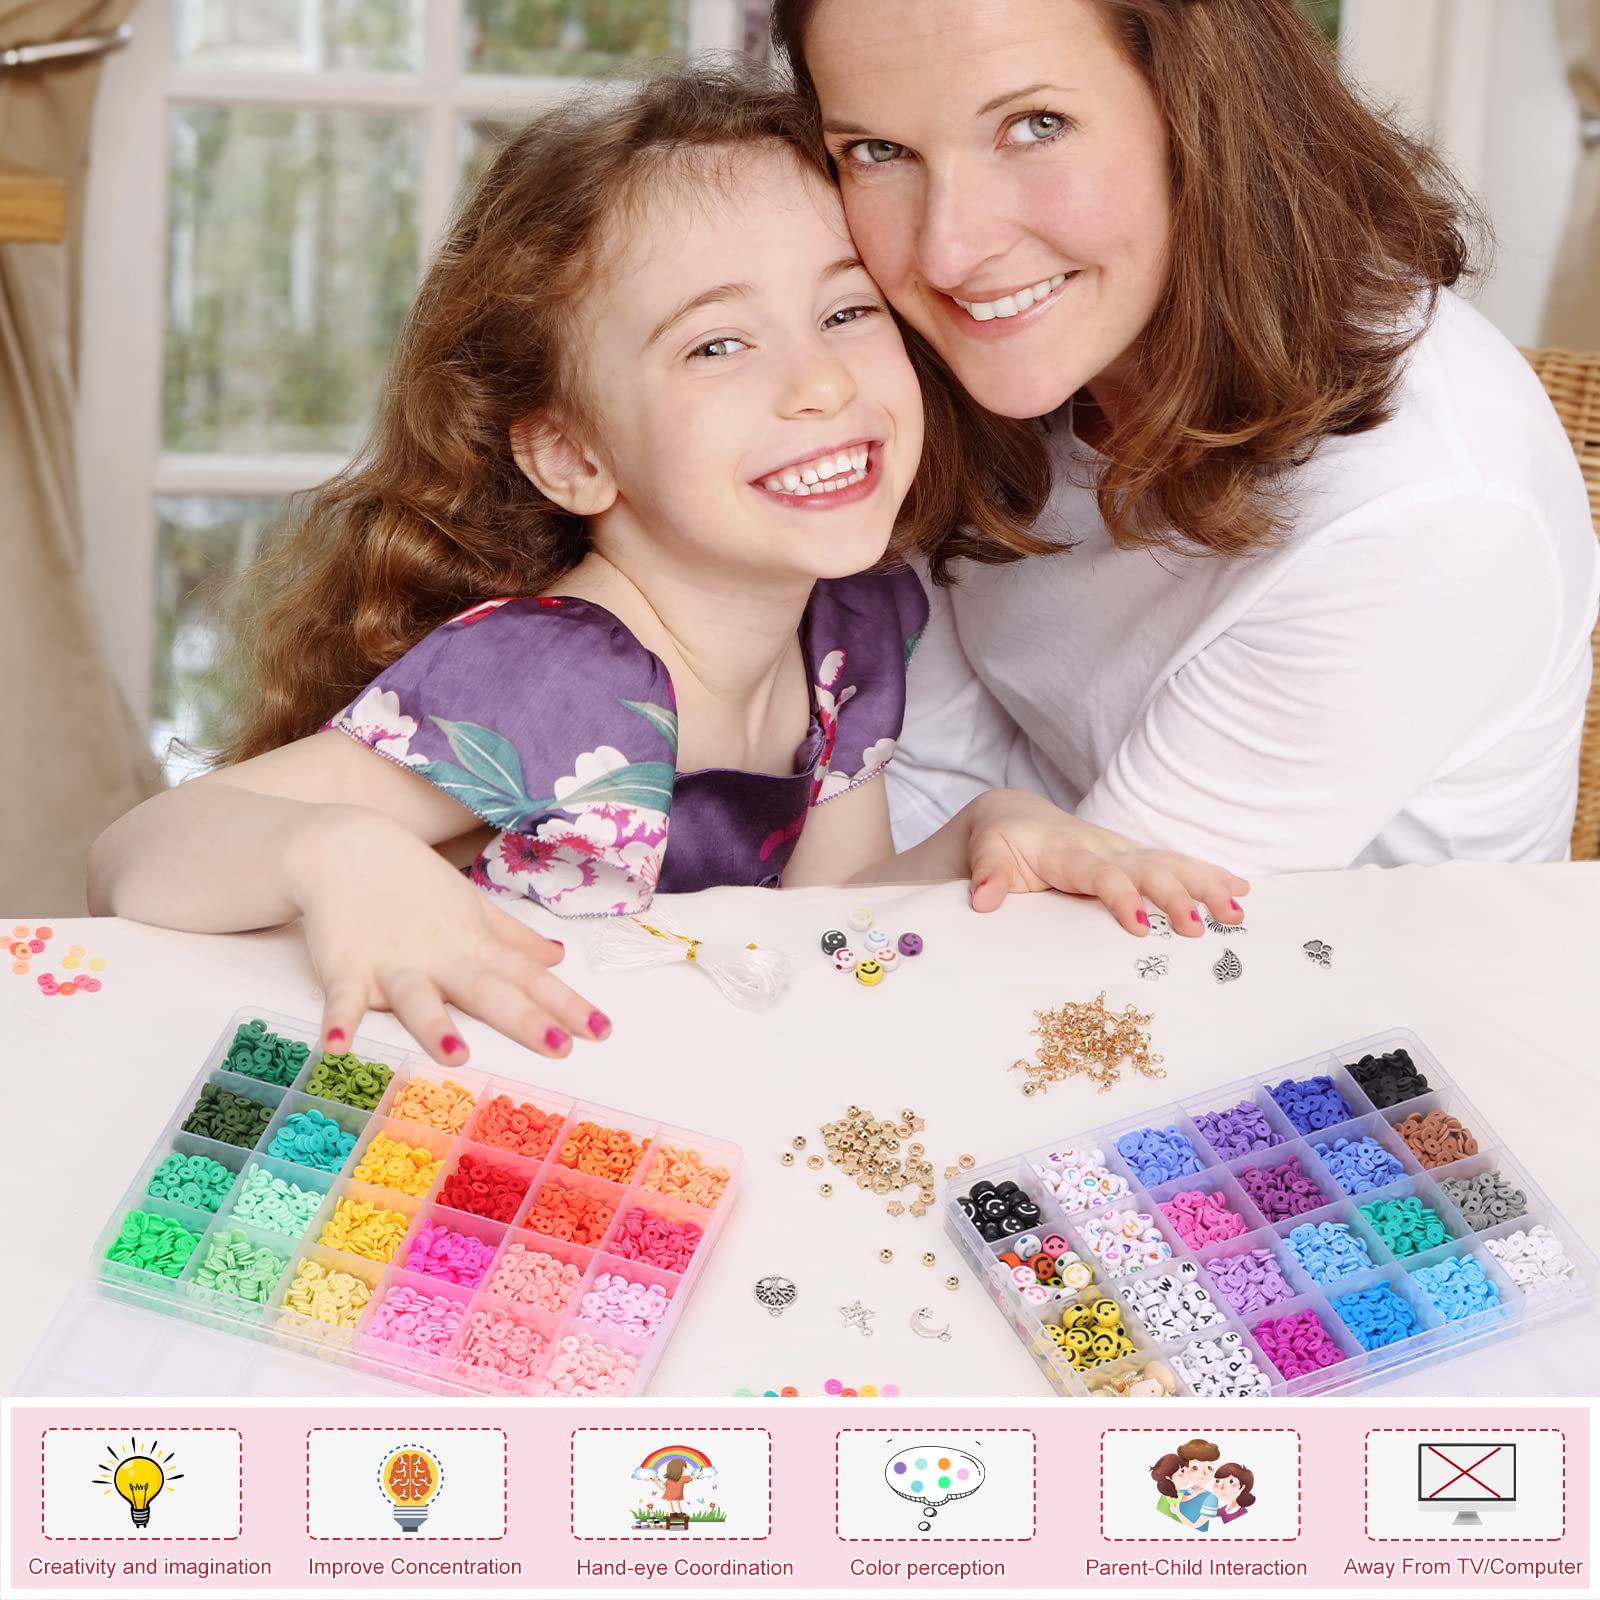 15000Pcs 144 Colors Clay Beads Charm Bracelet Making Kit for Girls 8-12  Polymer